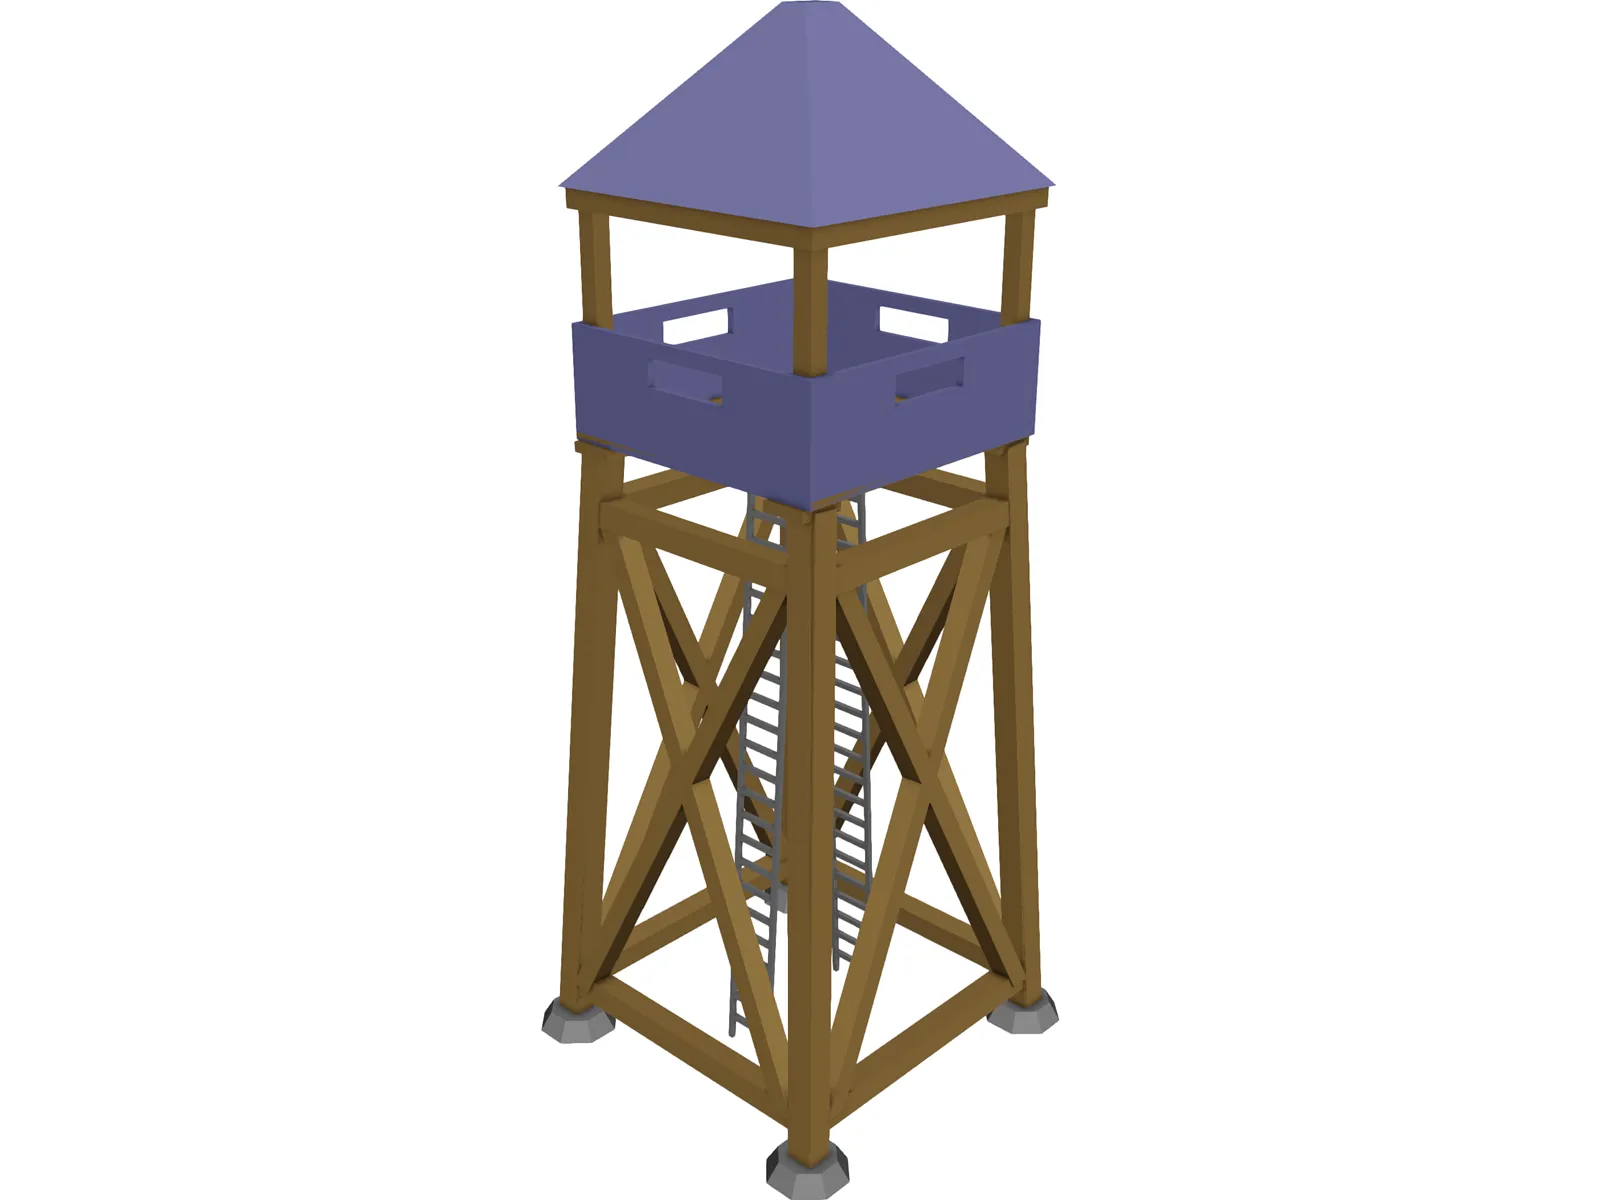 Guard Tower Middle Ages 3D Model